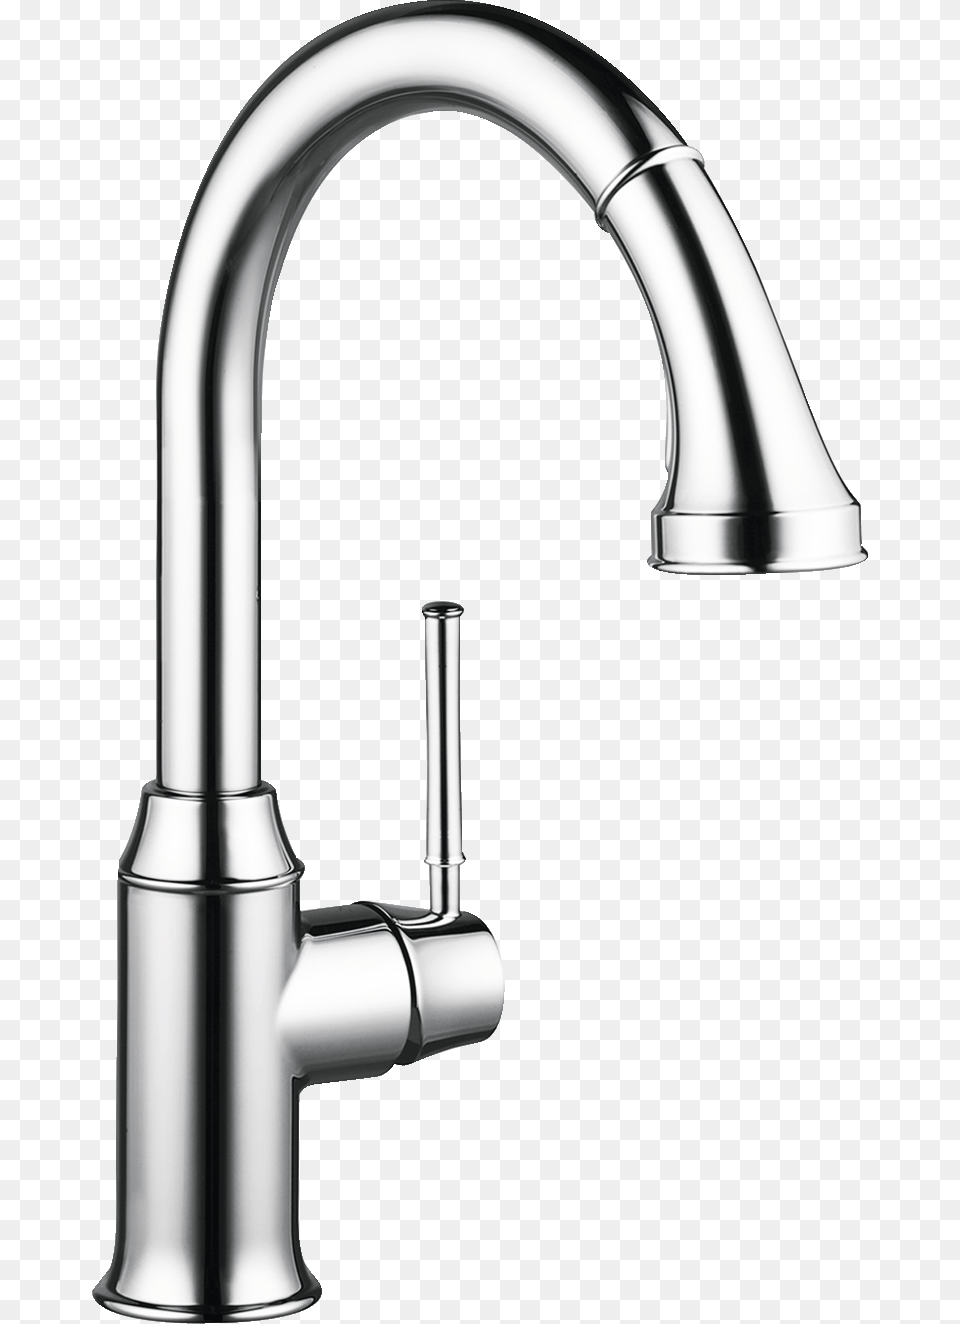 Higharc Kitchen Faucet Hansgrohe Talis C Kitchen Faucet, Bathroom, Indoors, Room, Shower Faucet Png Image